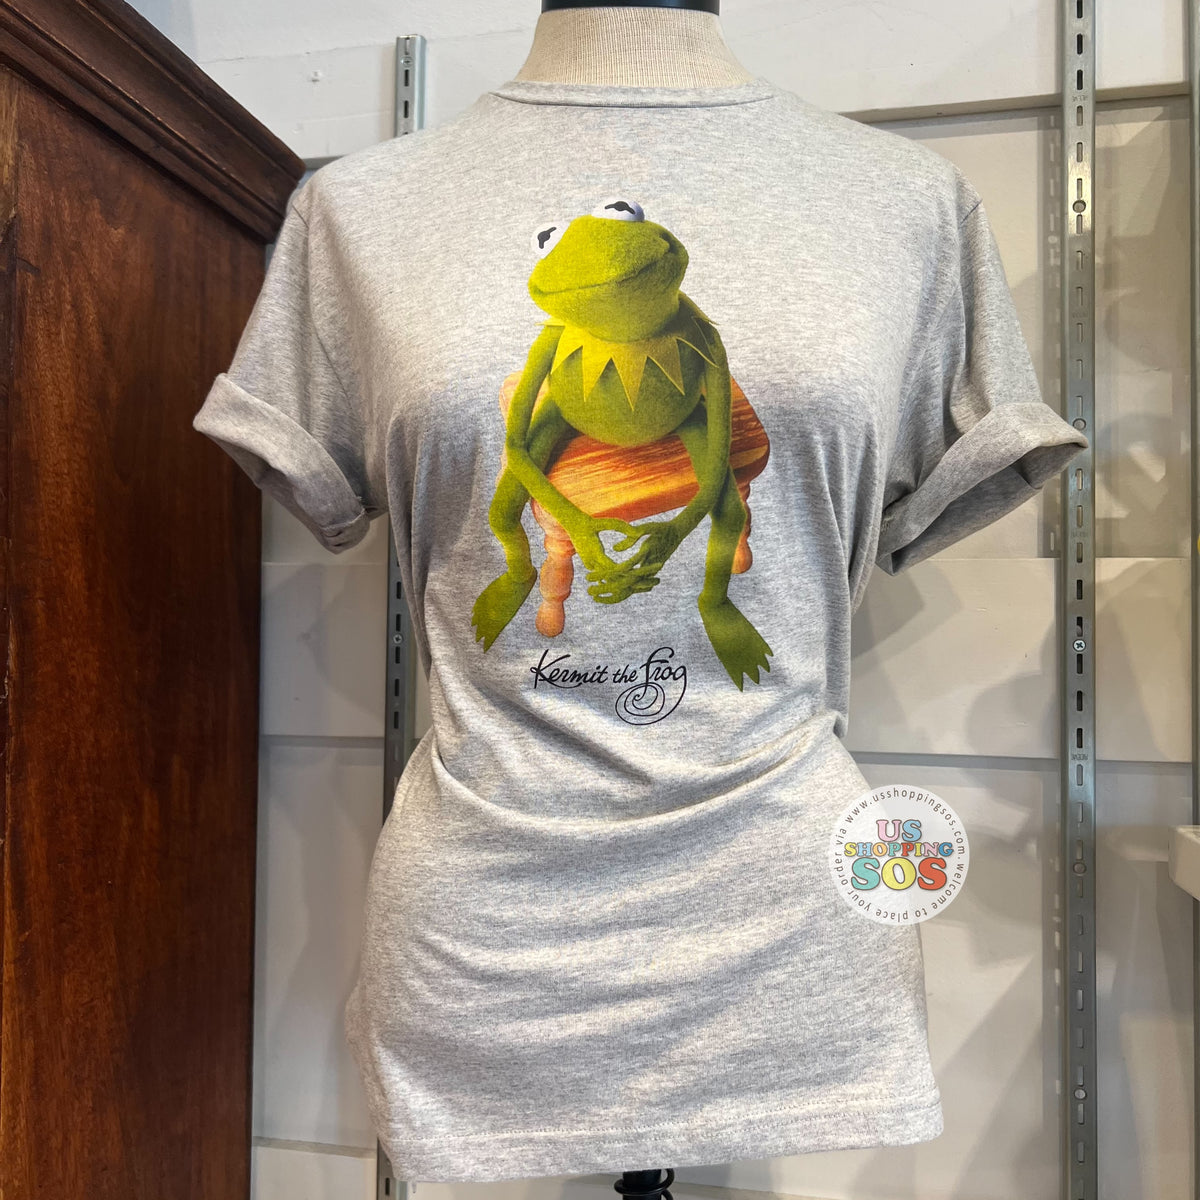 DLR - The Muppets Kermit Heather T-shirt Grey — the (Adult) USShoppingSOS Graphic Frog